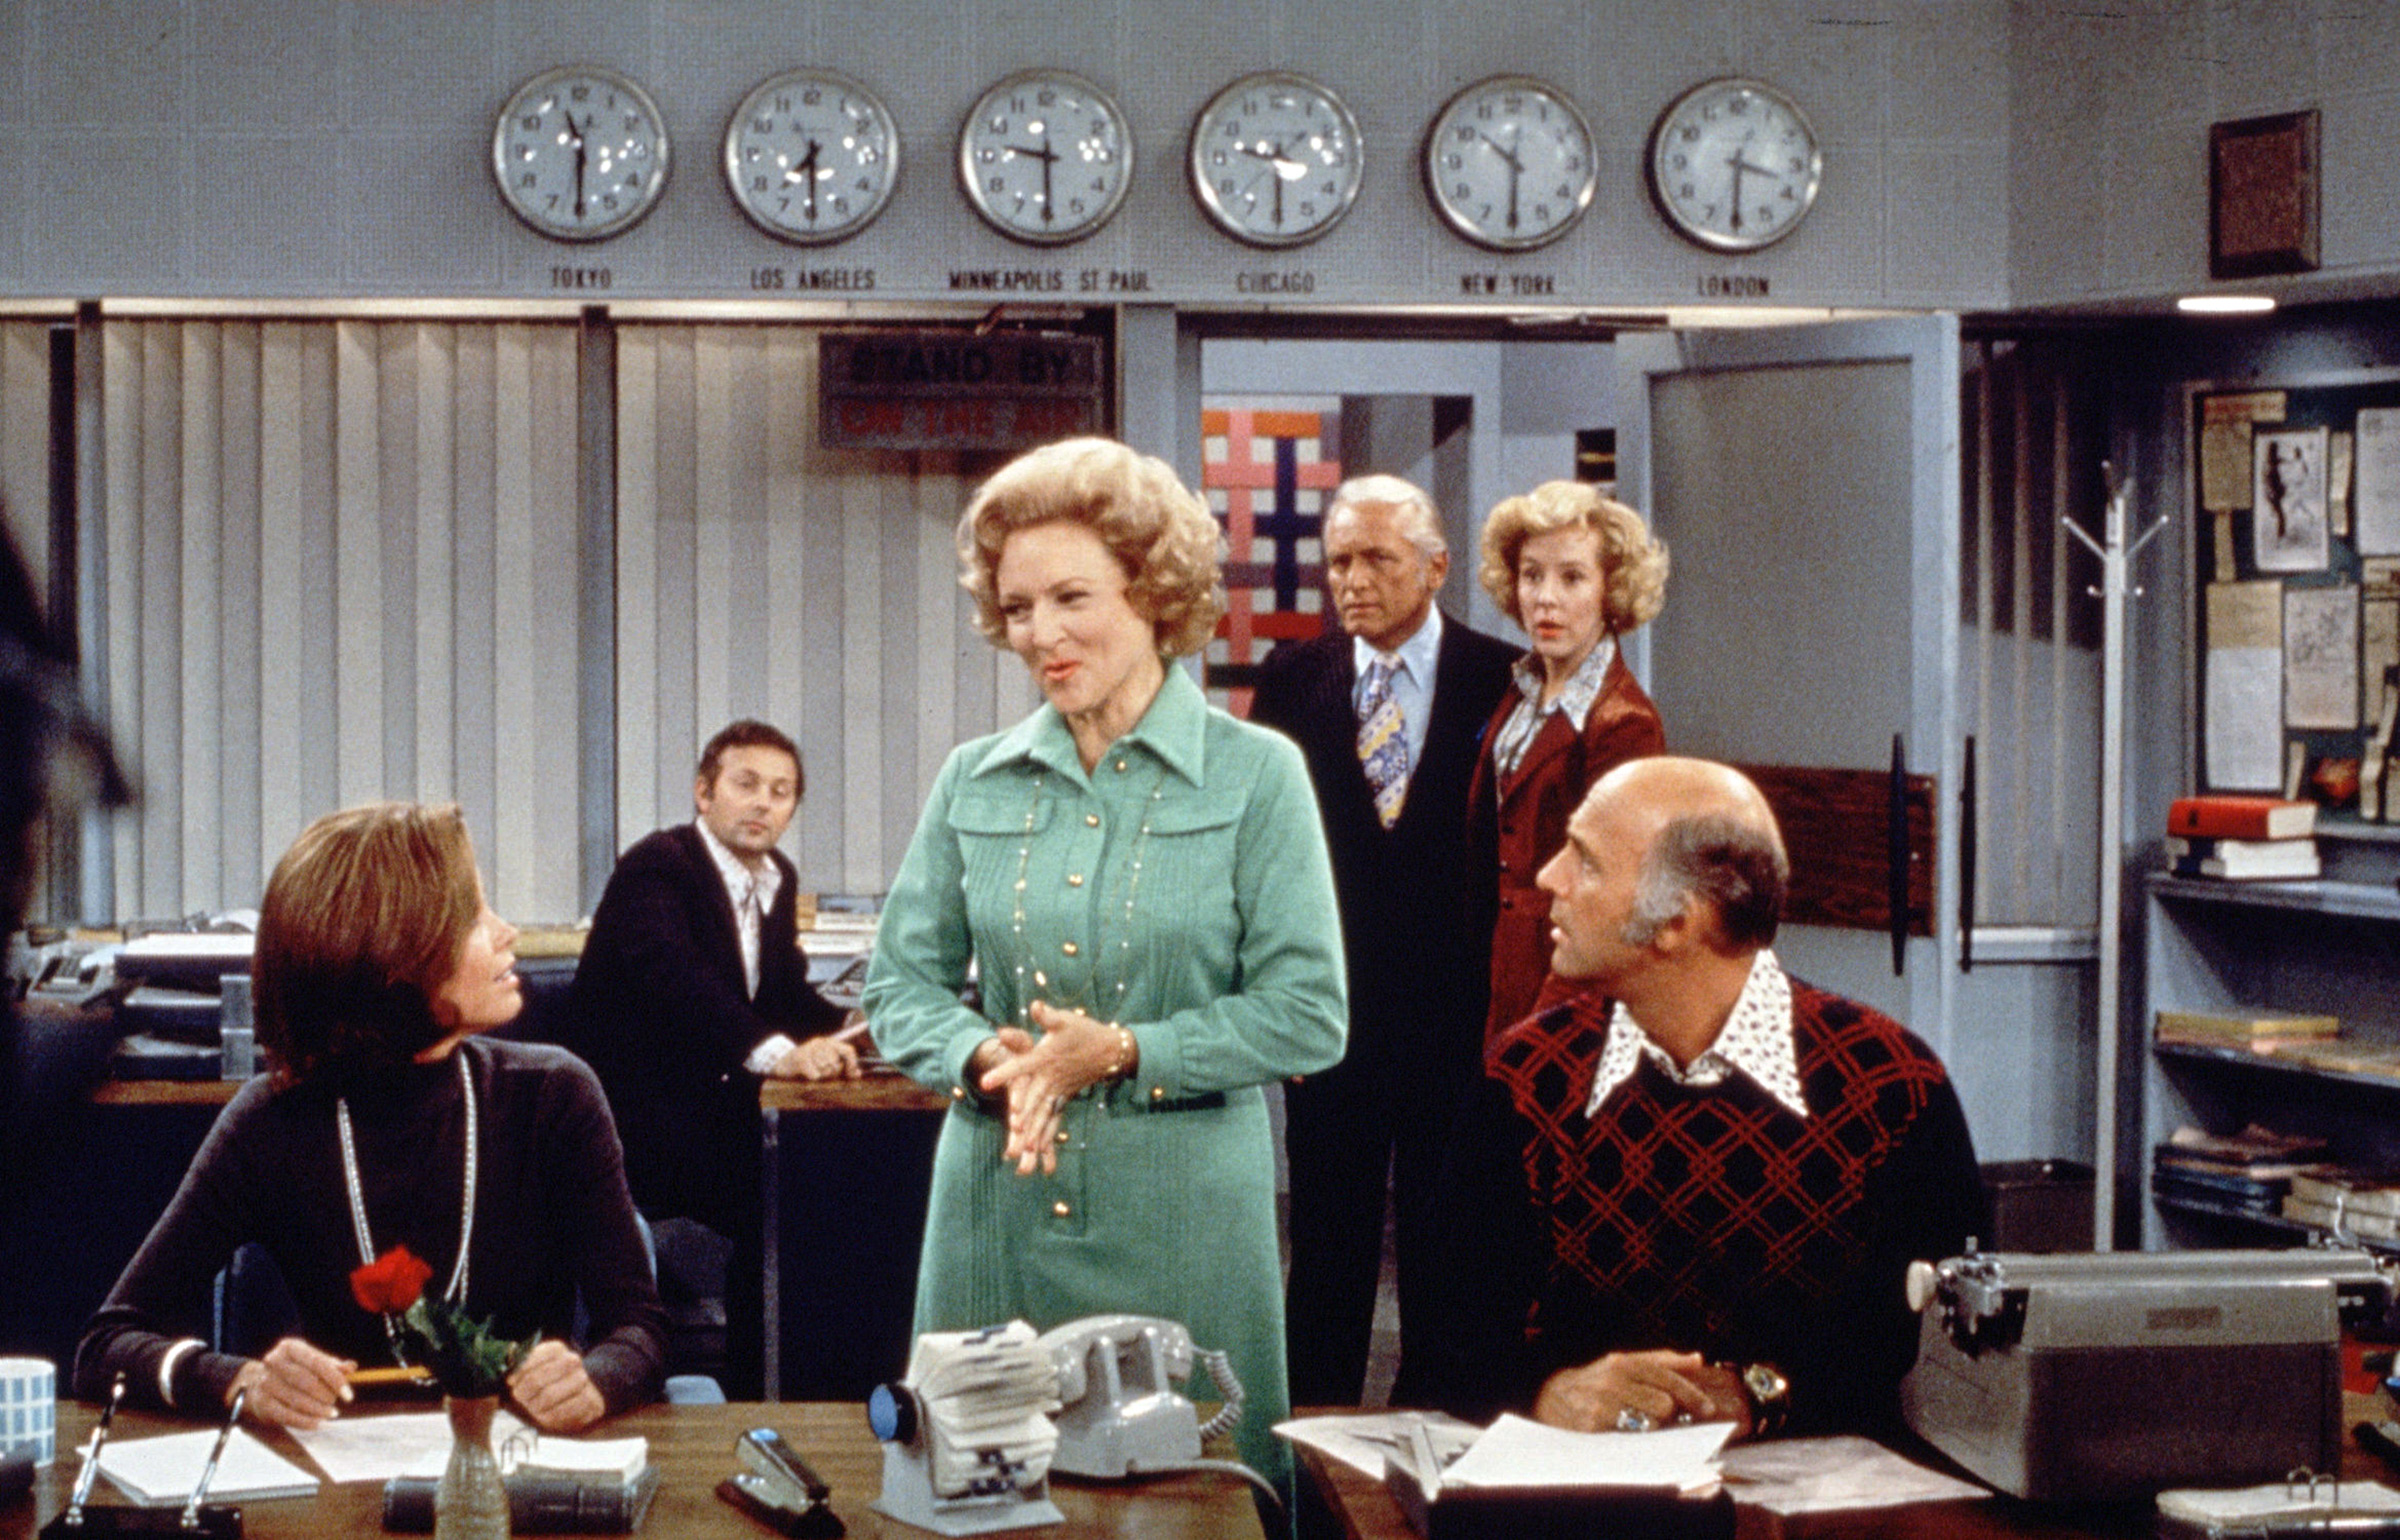 Betty White, center, on The Mary Tyler Moore Show in 1973.